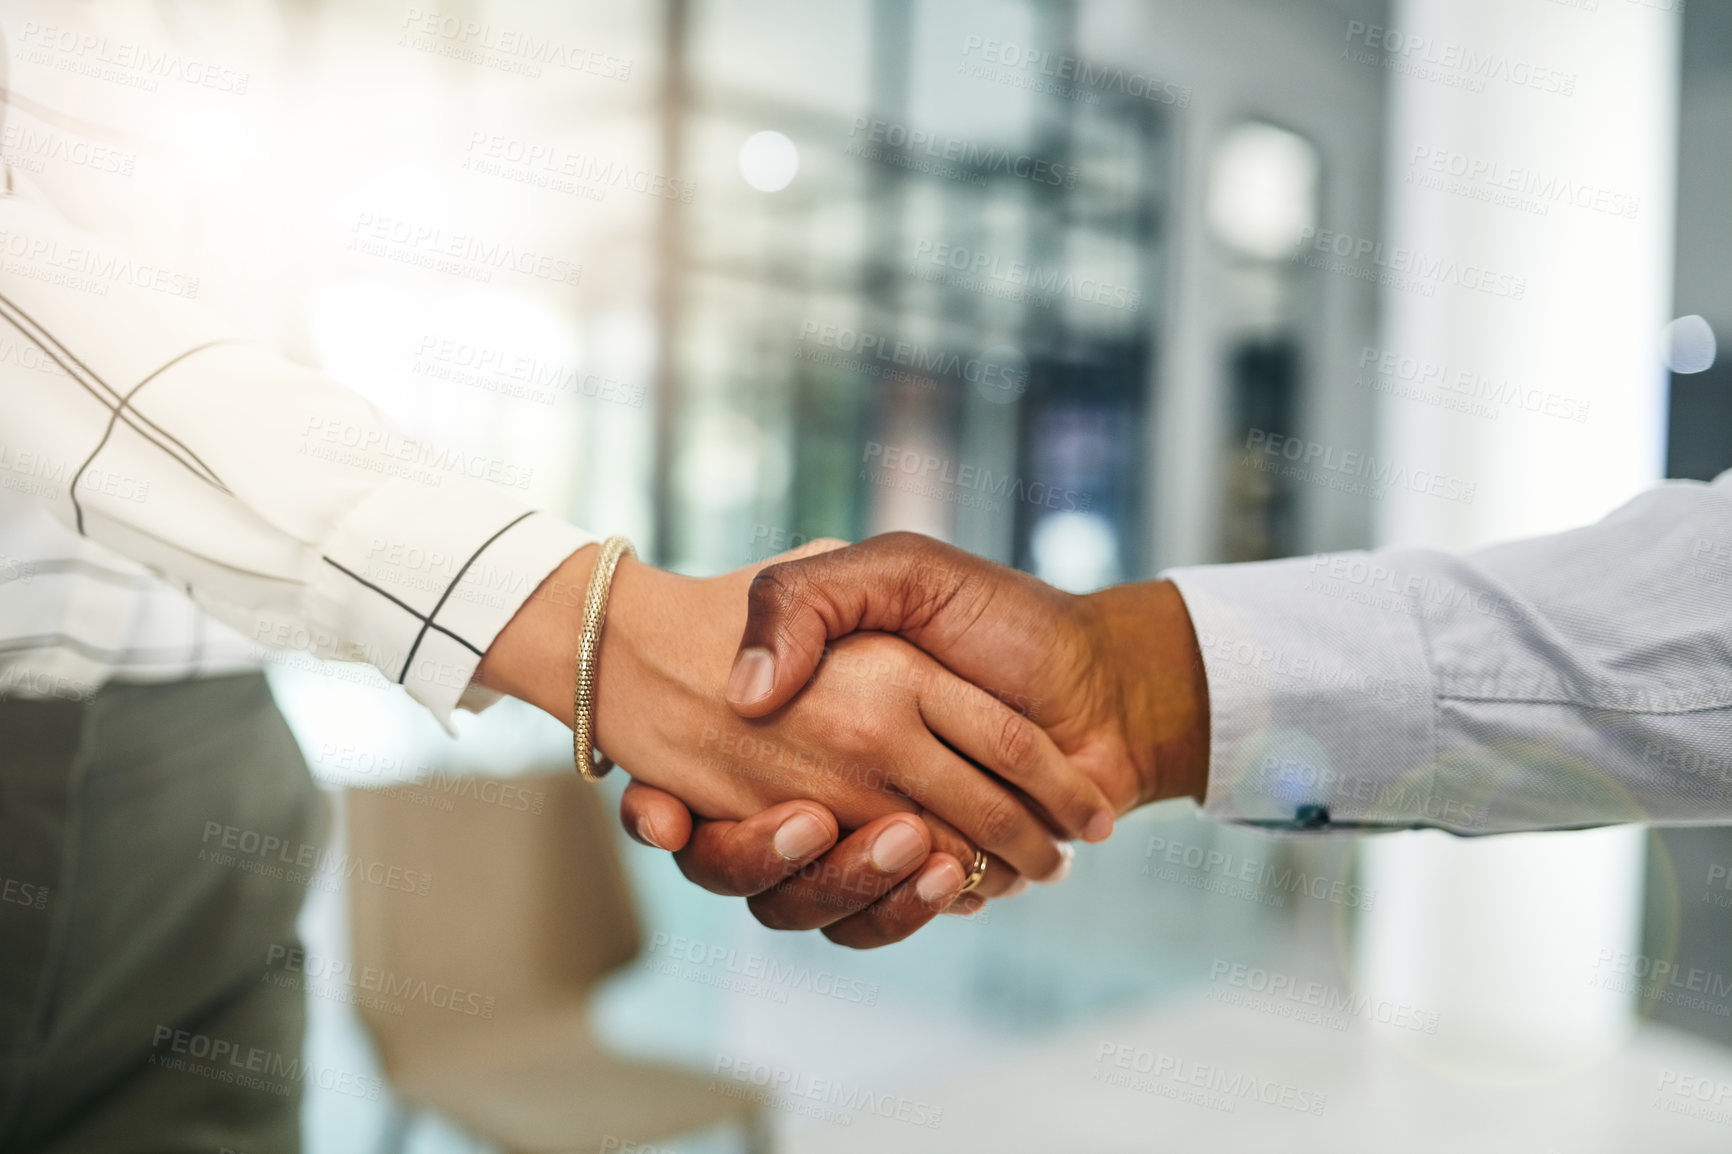 Buy stock photo Closeup shot of two businesspeople shaking hands in an office